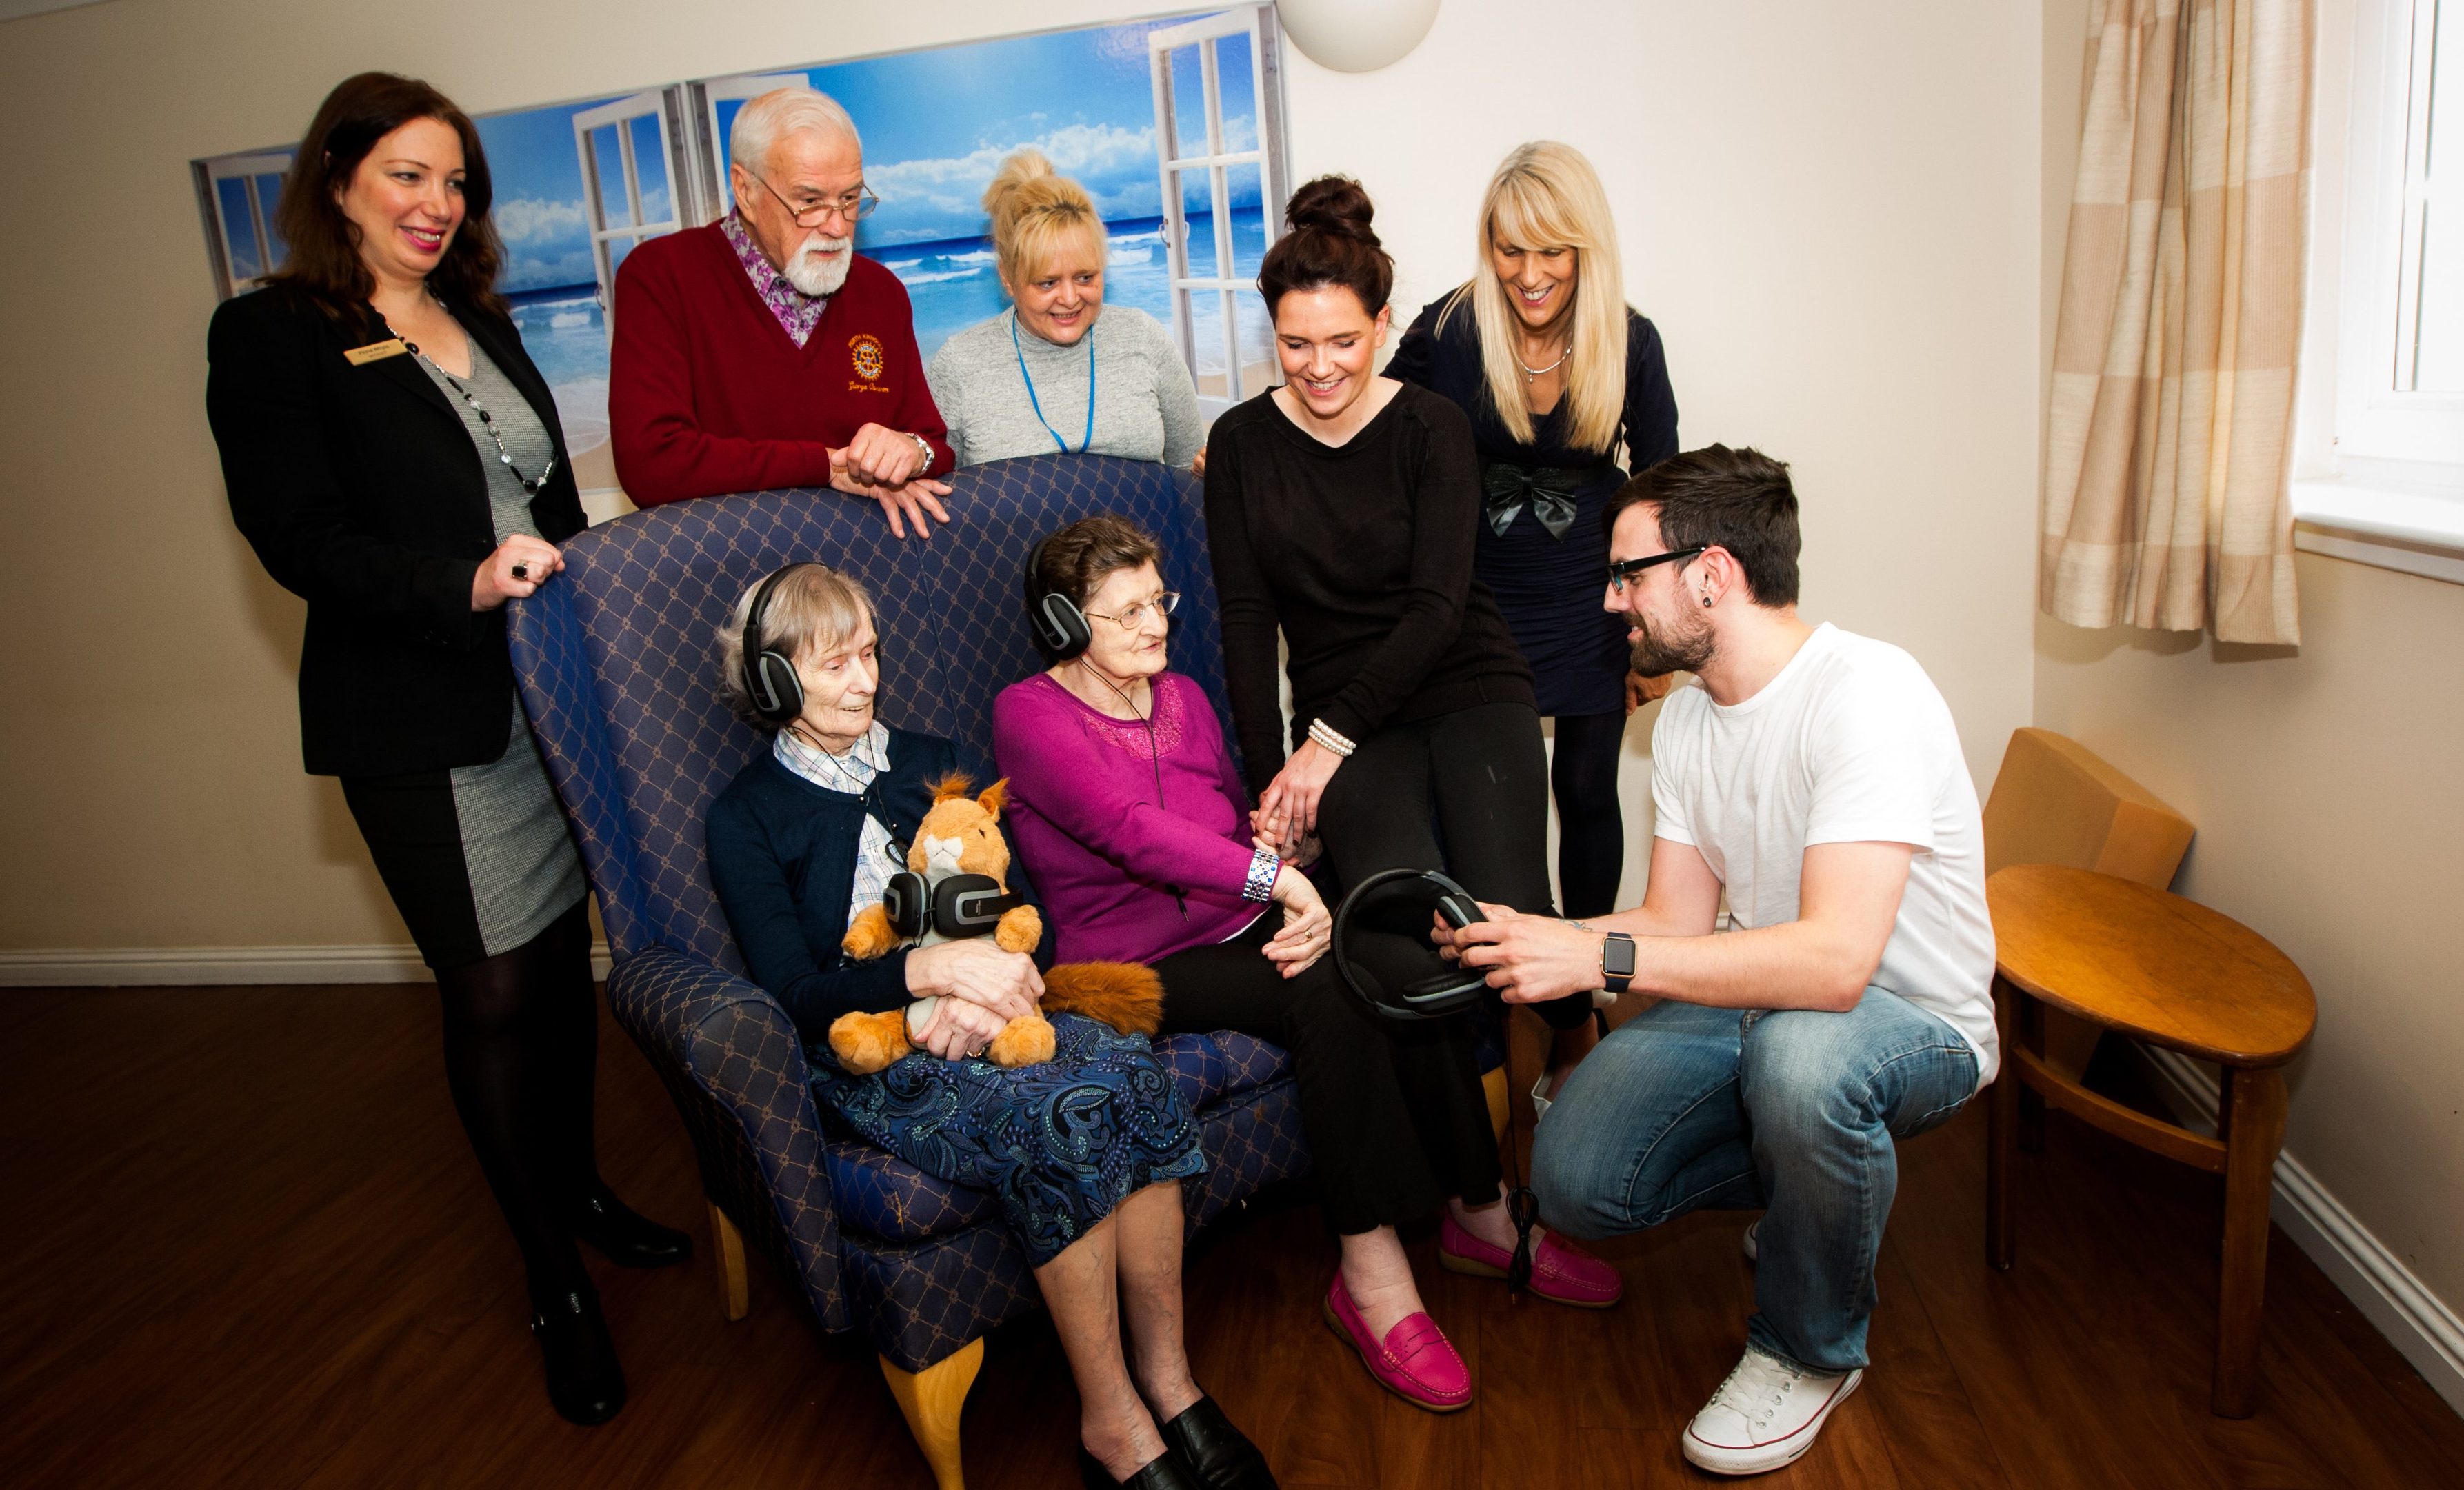 Connecting older people with memories via music. Pictured, at the front left to right is resident Cecilia alongside resident Alice, Jade Matthew (Activities Coordinator at Care Home), Carolyn Wilson (Fall Service Manager, NHS Tayside) and student Jeff Grant (NQ Computing Technology student). Back row, left to right is Fiona Whyte (Manager at Care Home), George Cameron (Perth Kinnoull Rotary) and Julie Parker (Social Work).